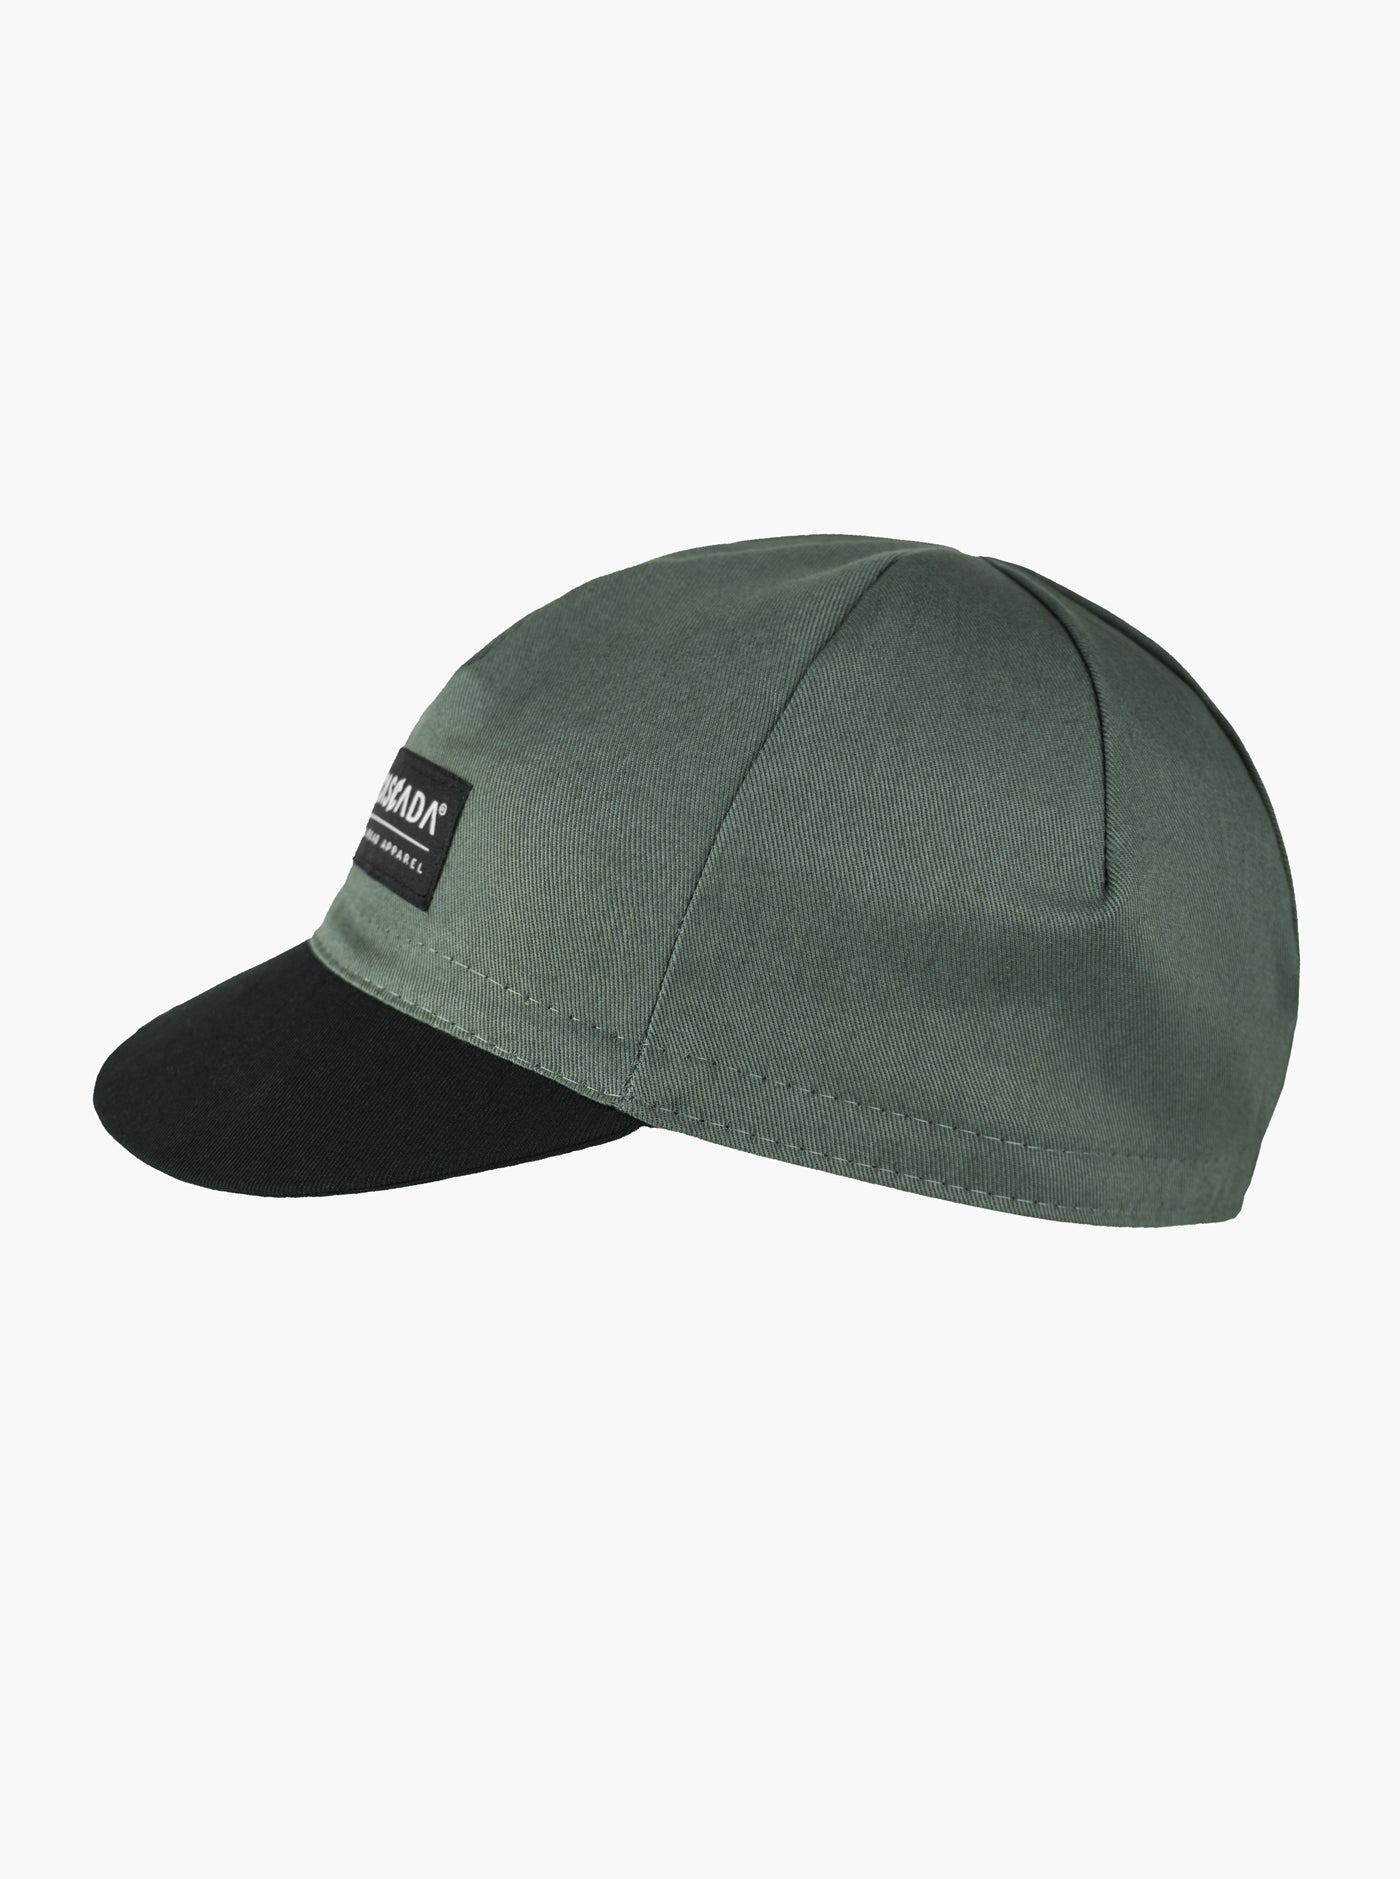 Classic Cycling Cap - Pewter Green